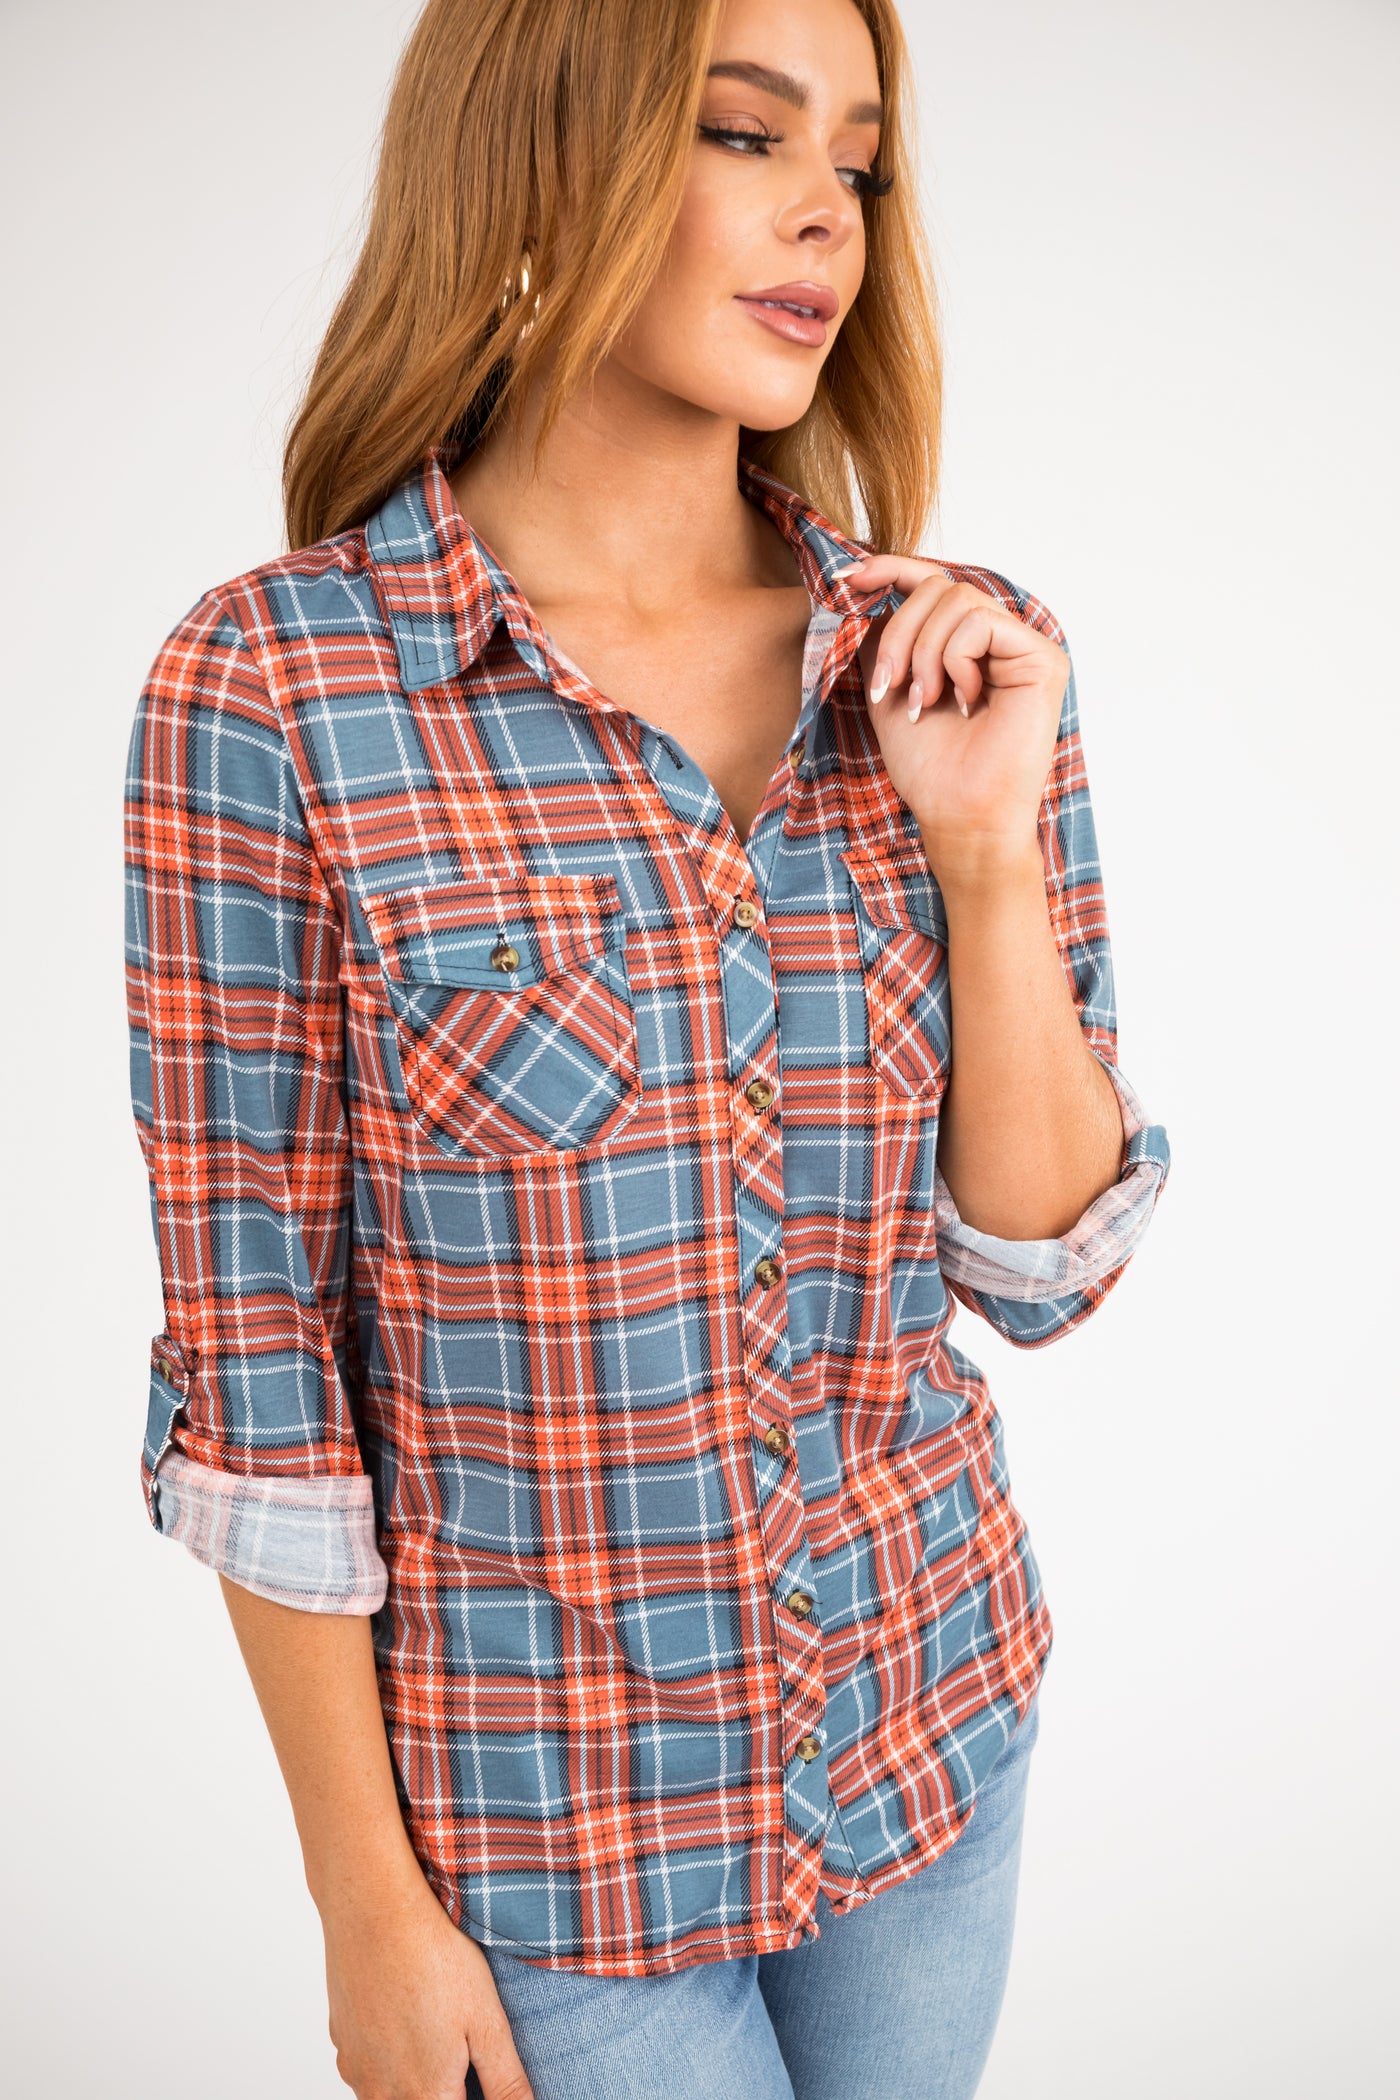 Slate and Pumpkin Plaid Top with Chest Pocket